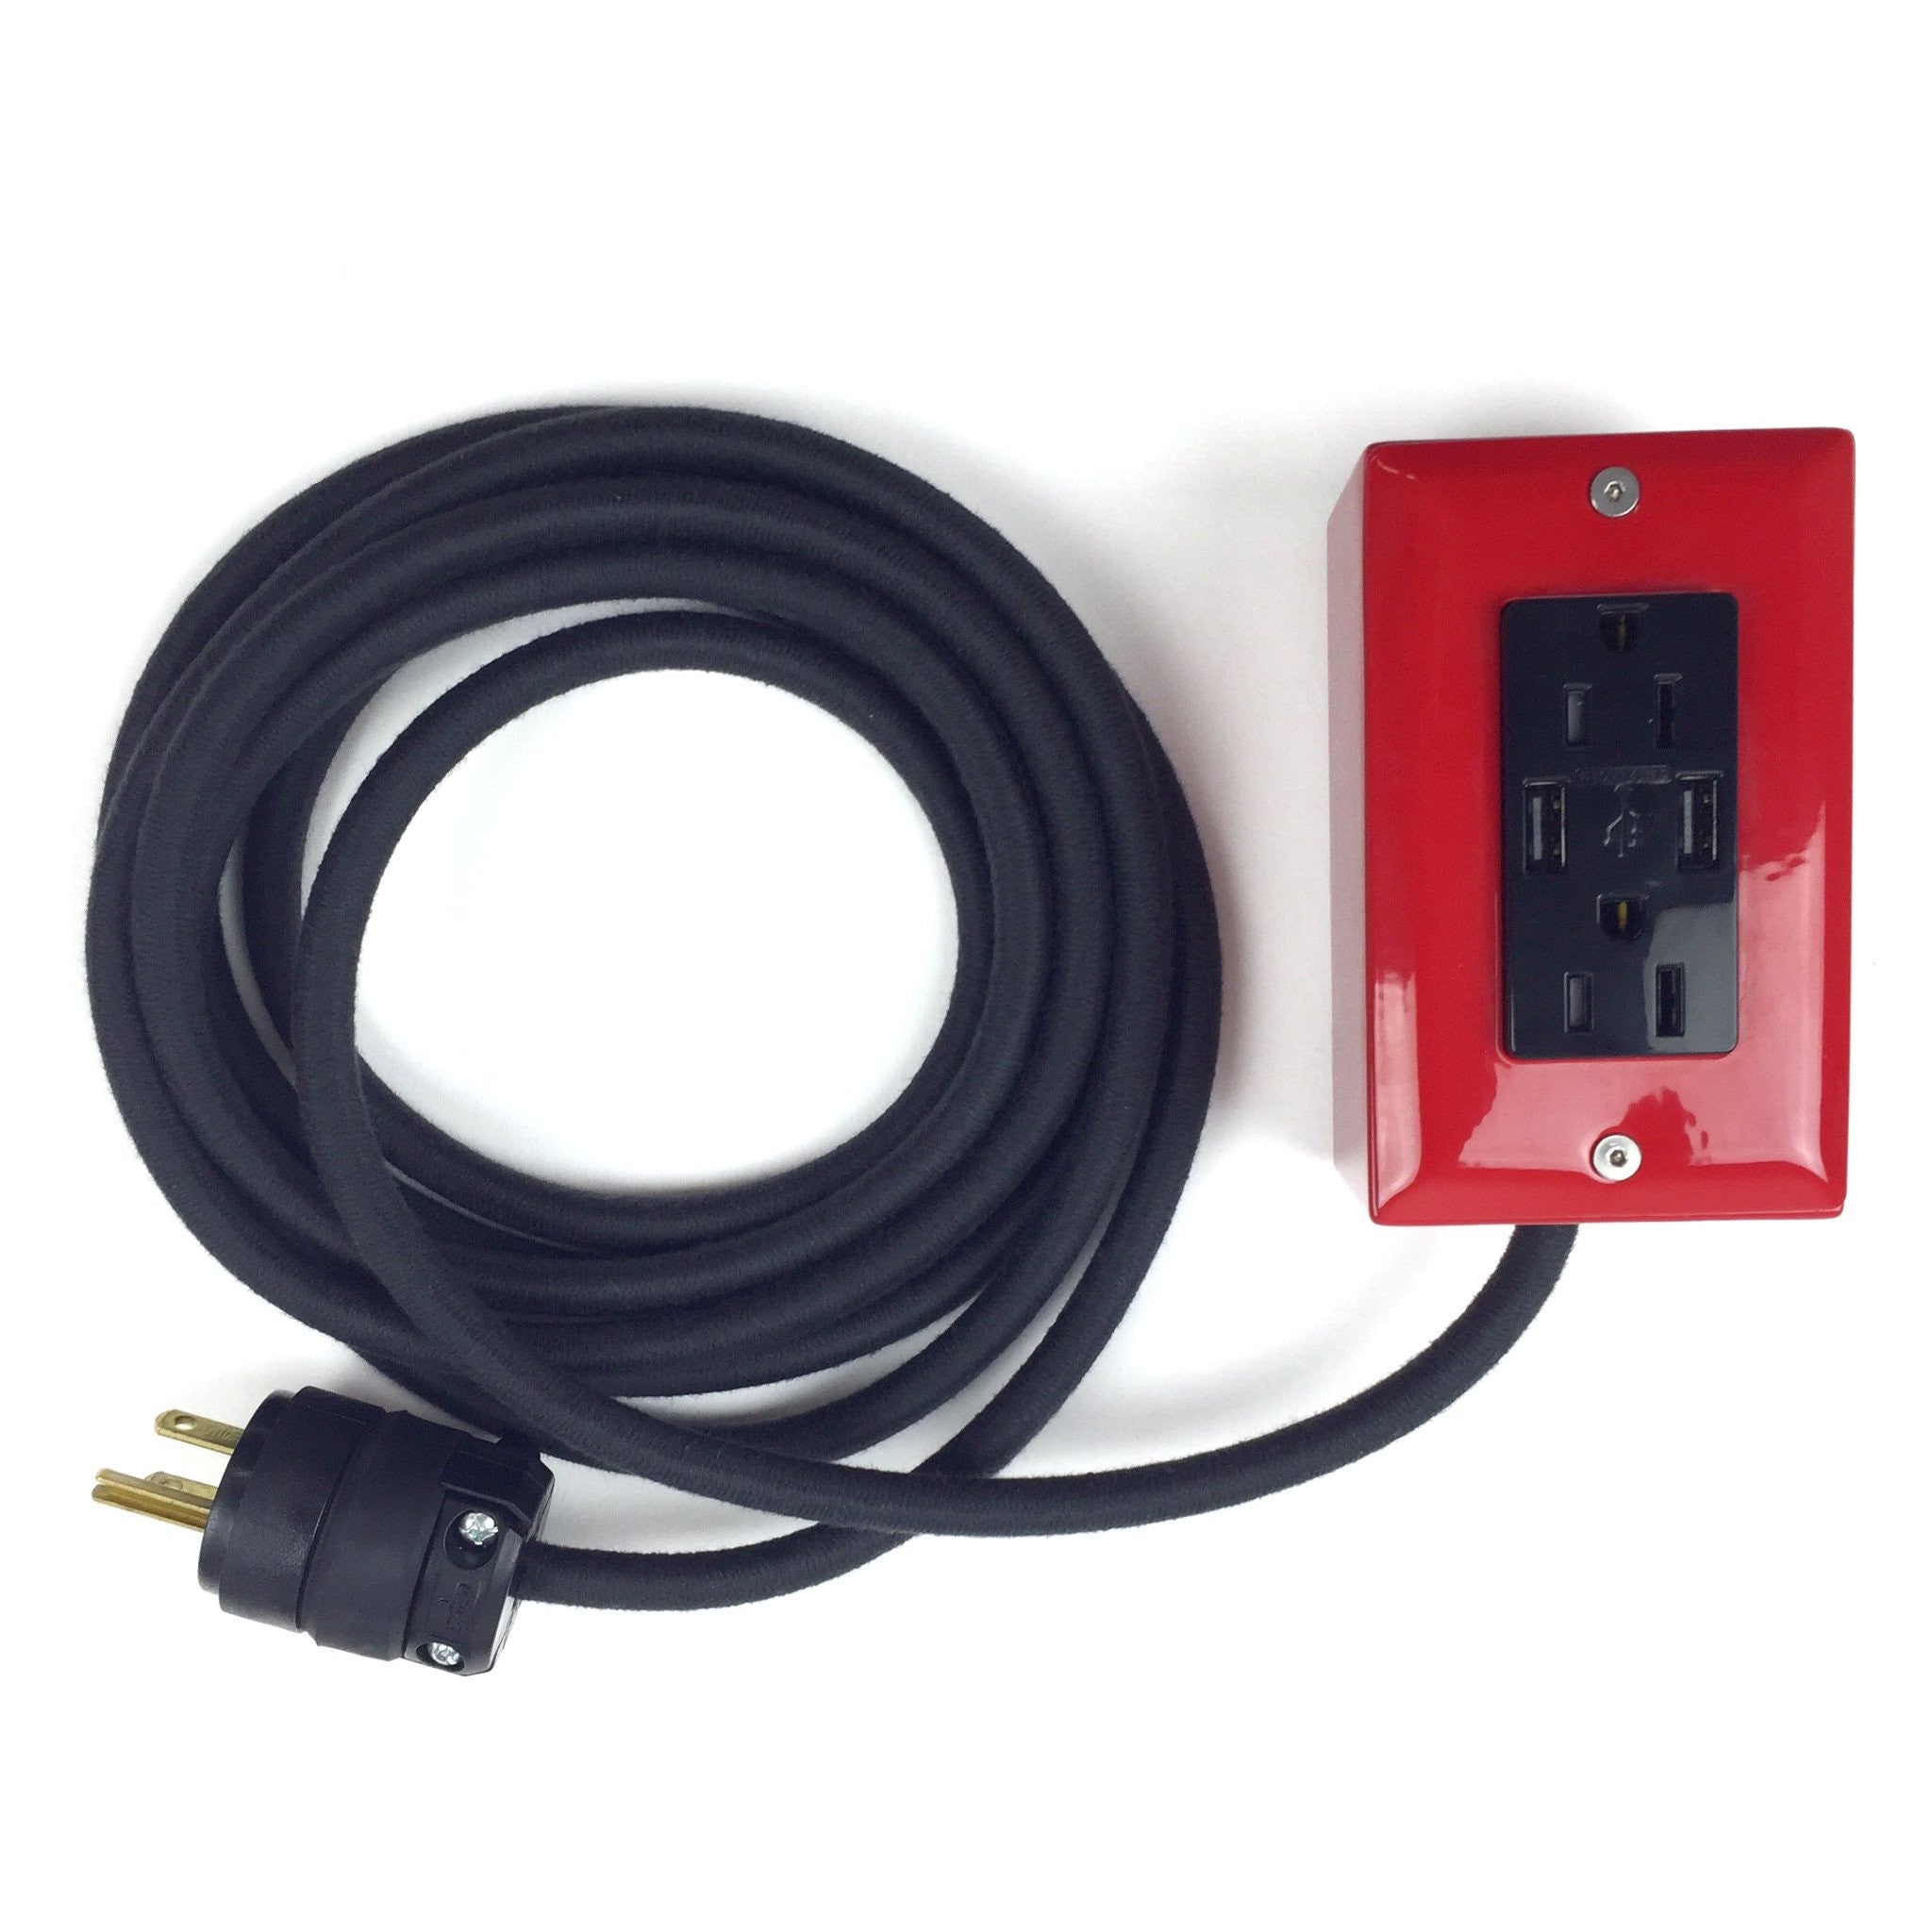 The First Smart Chip Extension Cord - 12' Extō Dual-USB, Dual-Outlet - Charcoal Red